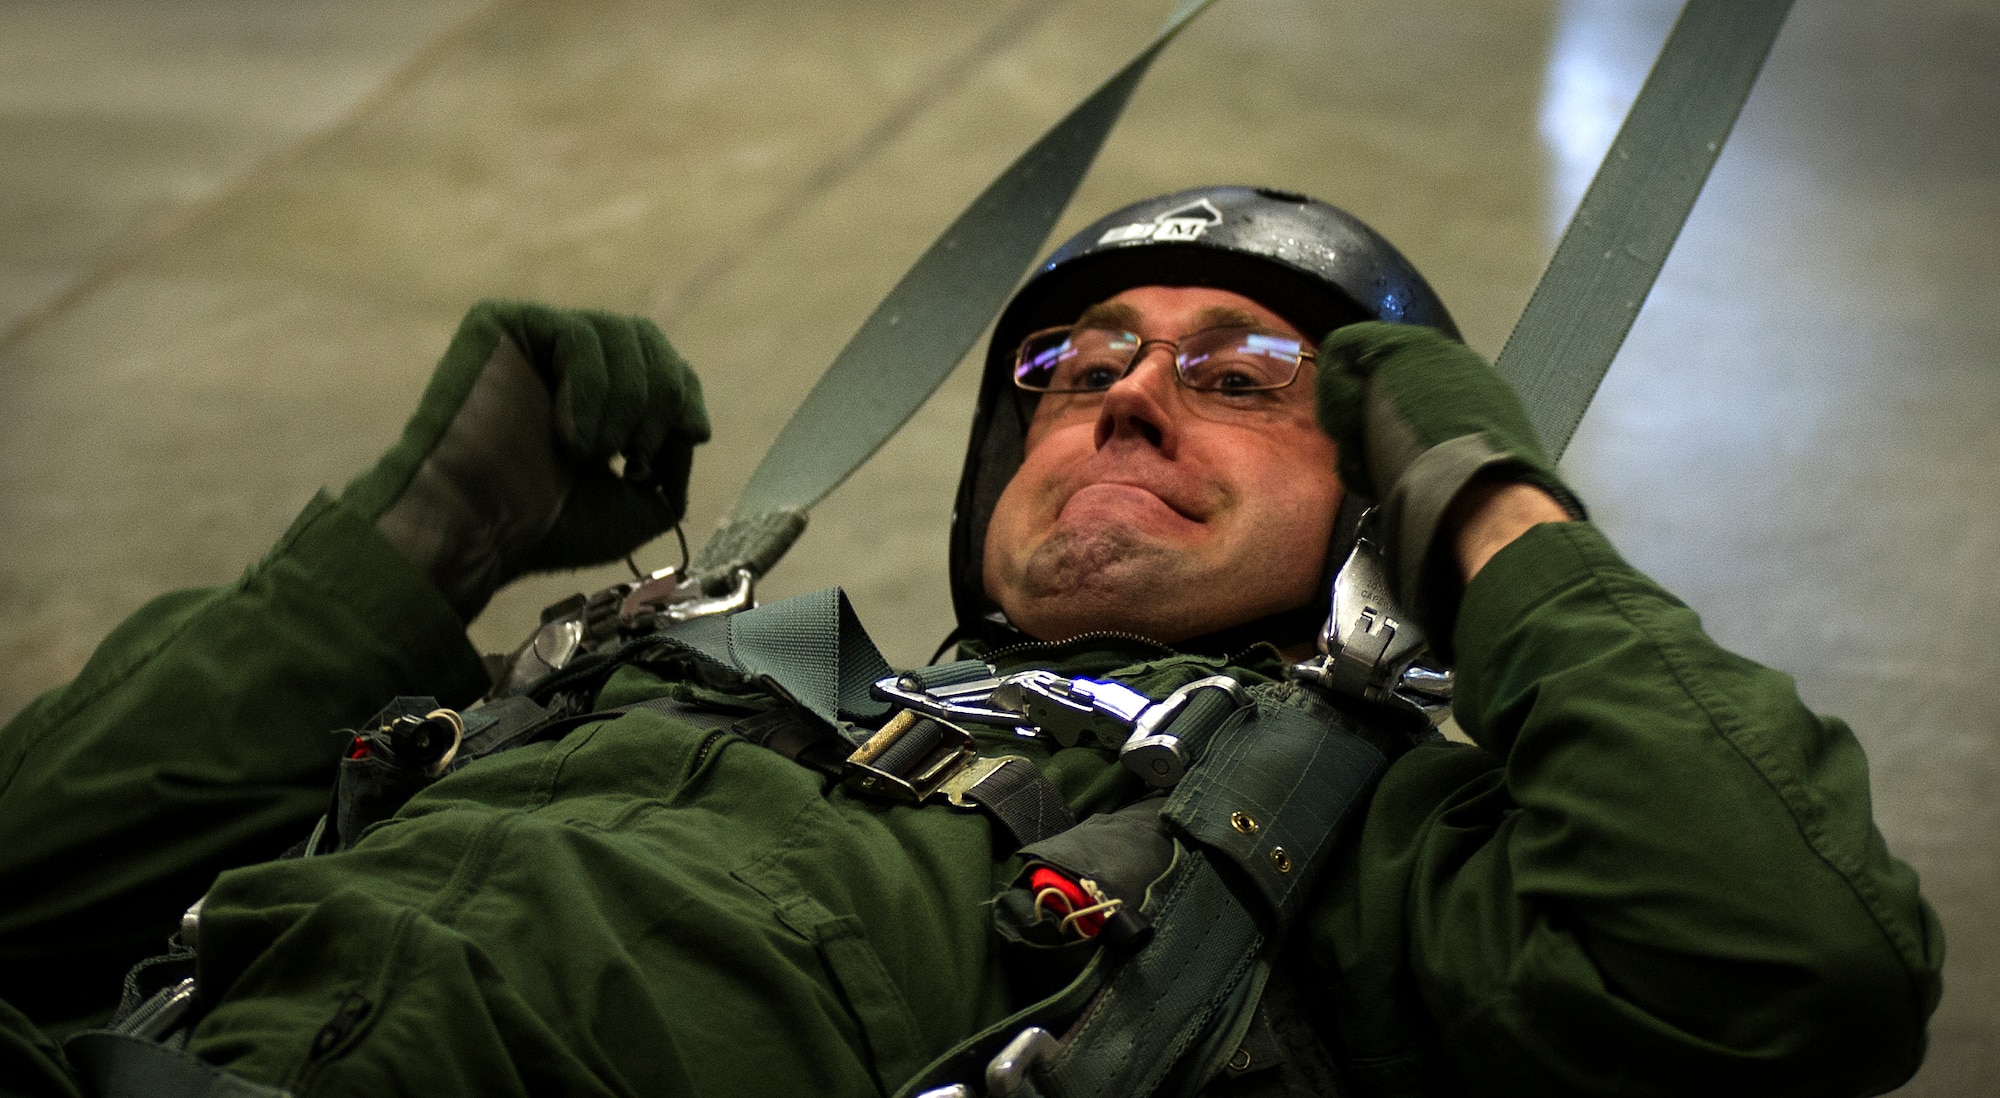 Staff Sgt. Erik Nosich, 144th Airlift Squadron loadmaster stationed at Joint Base Elmendorf-Richardson Alaska, practices being dragged by a parachute May 26, 2016, at Fairchild Air Force Base, Wash. The parachuting program’s goal is to train all aircrew members, who could potentially have to bail out of their aircraft, on how to survive a parachute ride so they can be recovered by recovery personnel.  (U.S. Air Force photo/Airman 1st Class Sean Campbell)
